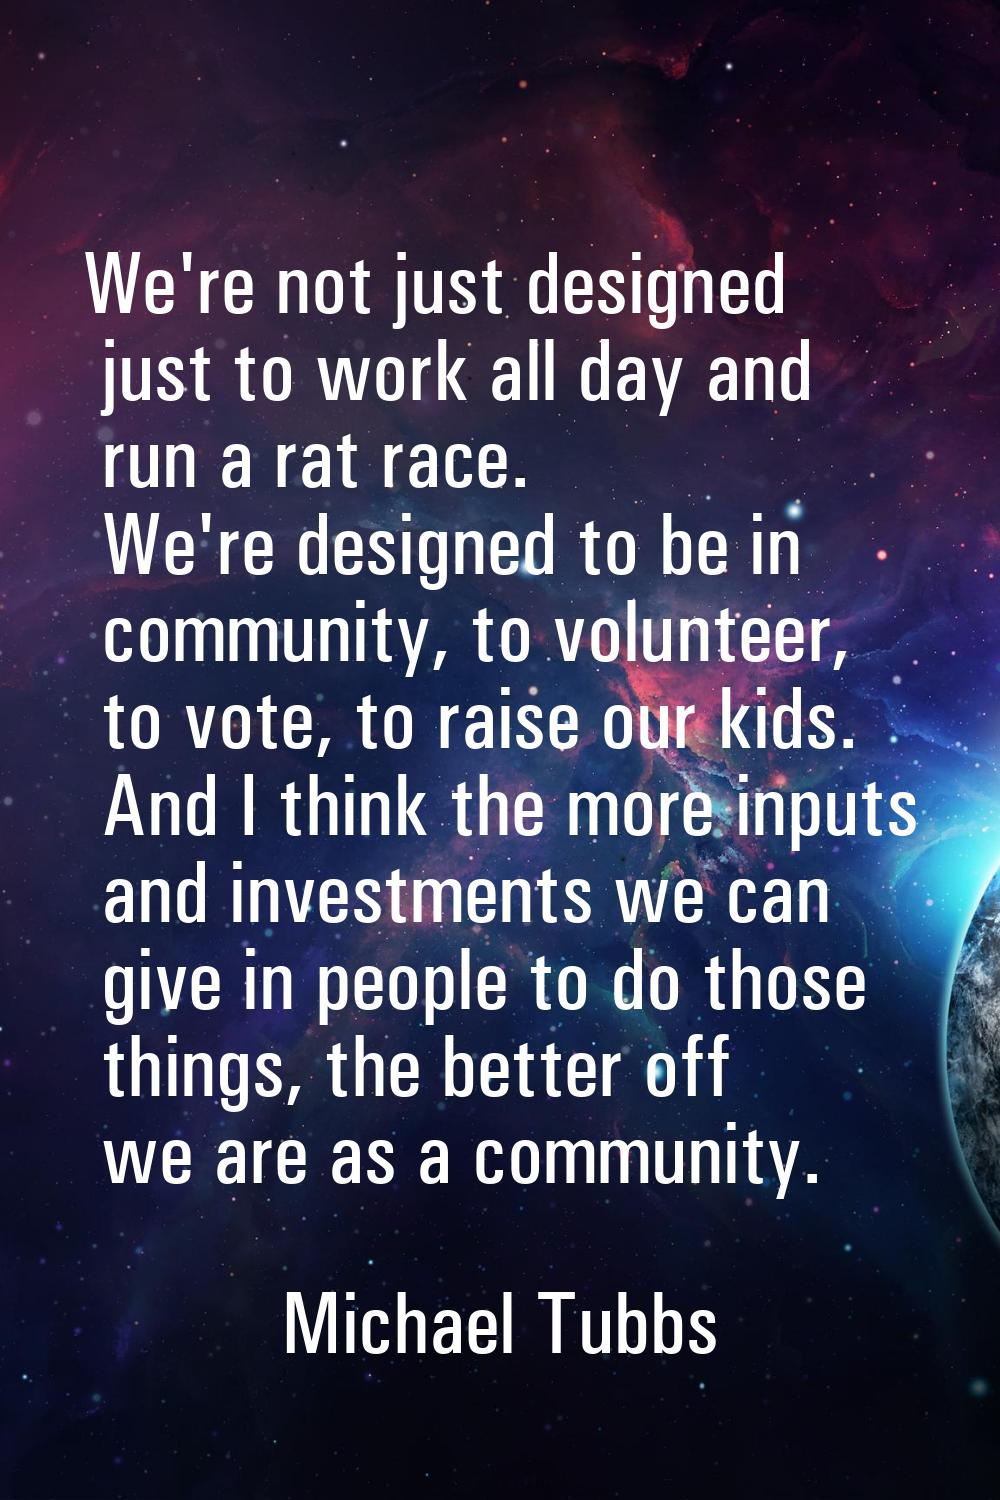 We're not just designed just to work all day and run a rat race. We're designed to be in community,